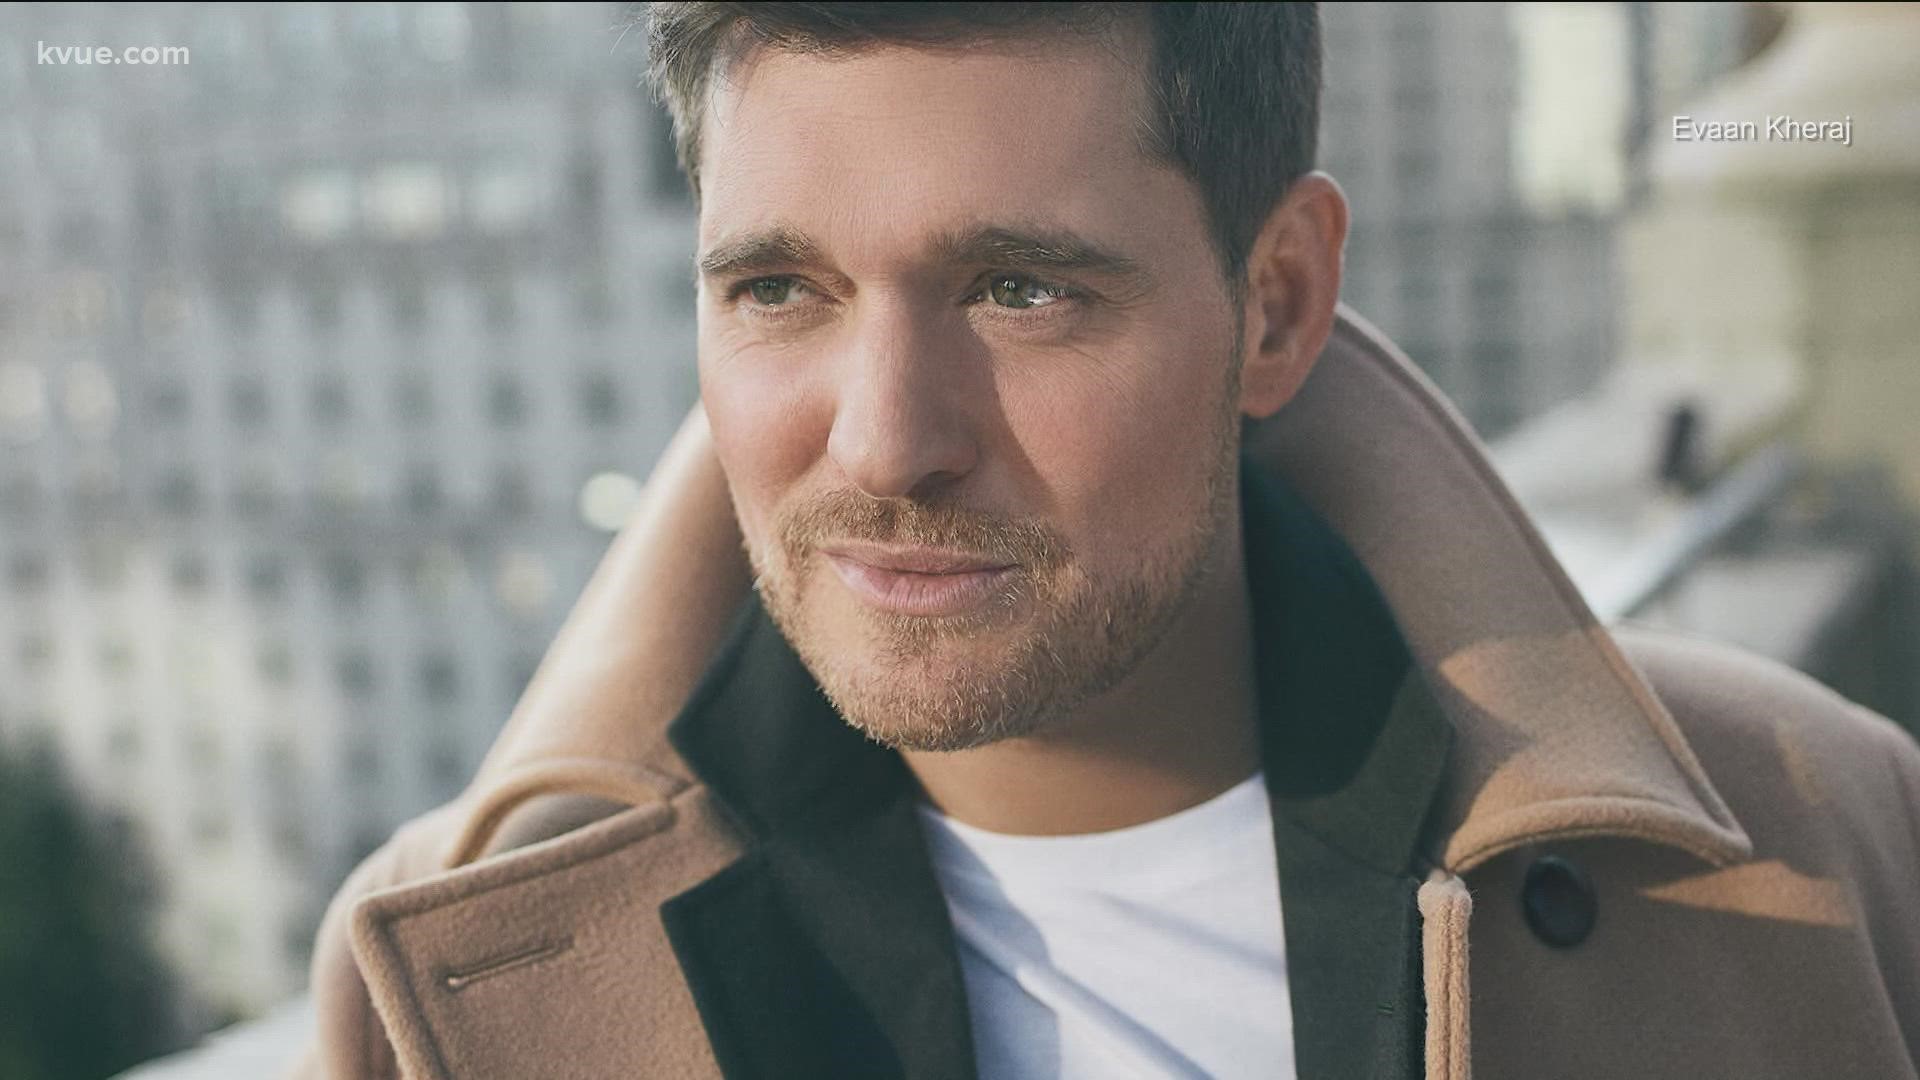 Michael Bublé canceled his appearance at the Frank Erwin Center after the venue didn't accommodate his request for stricter COVID-19 safety protocols.